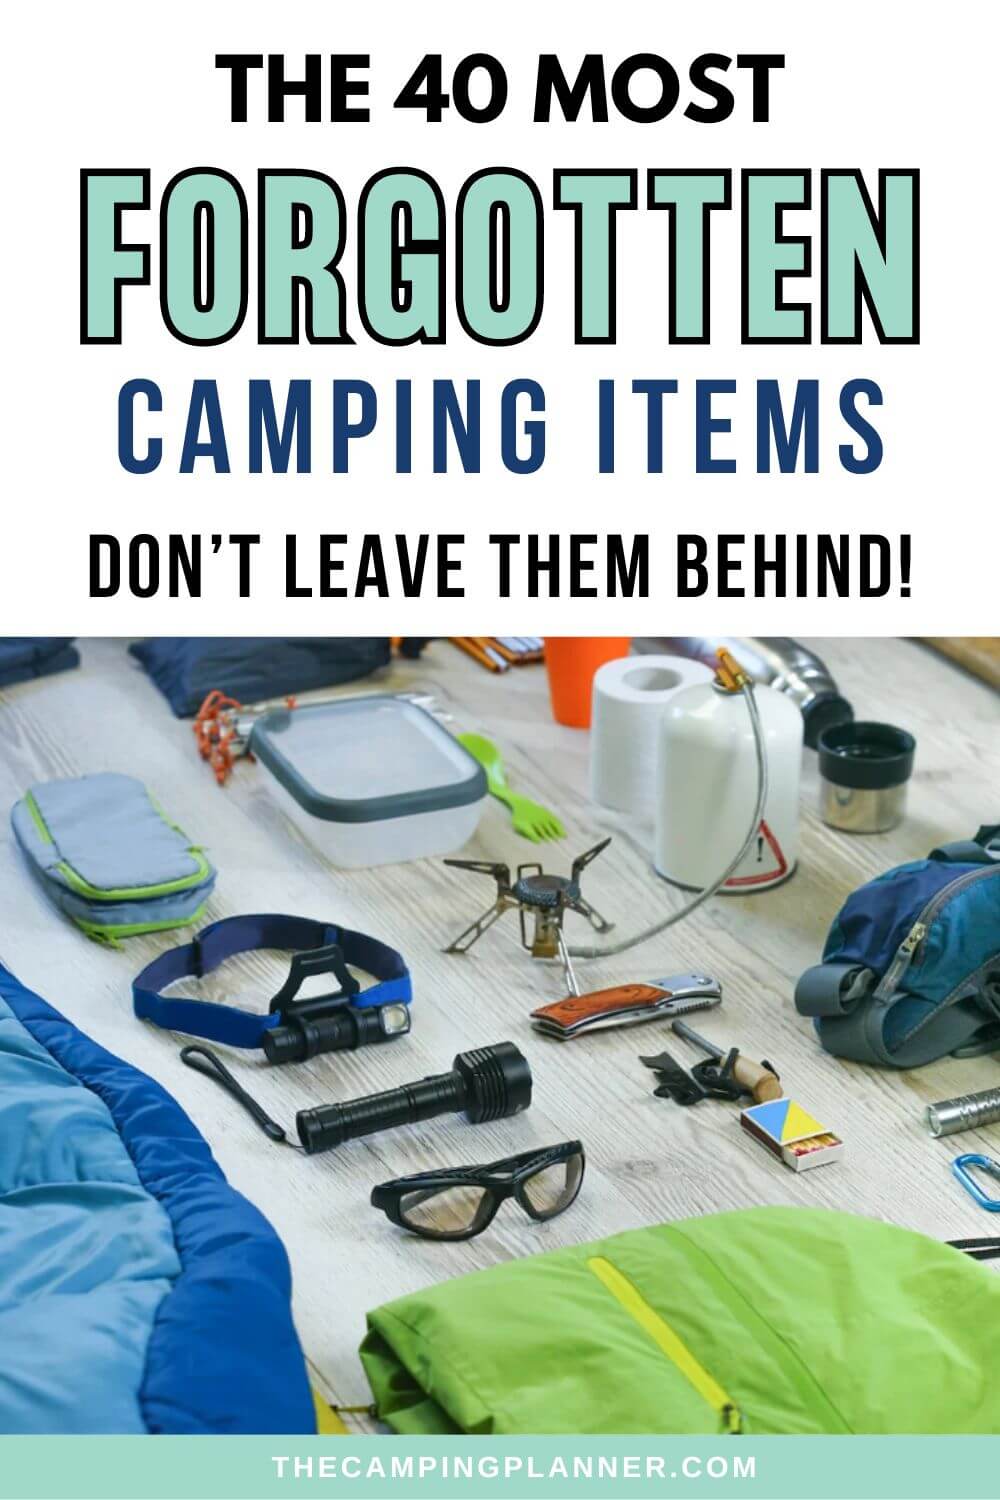 the 40 most forgotten camping items don't leave them behind with image of camping gear spread out on floor